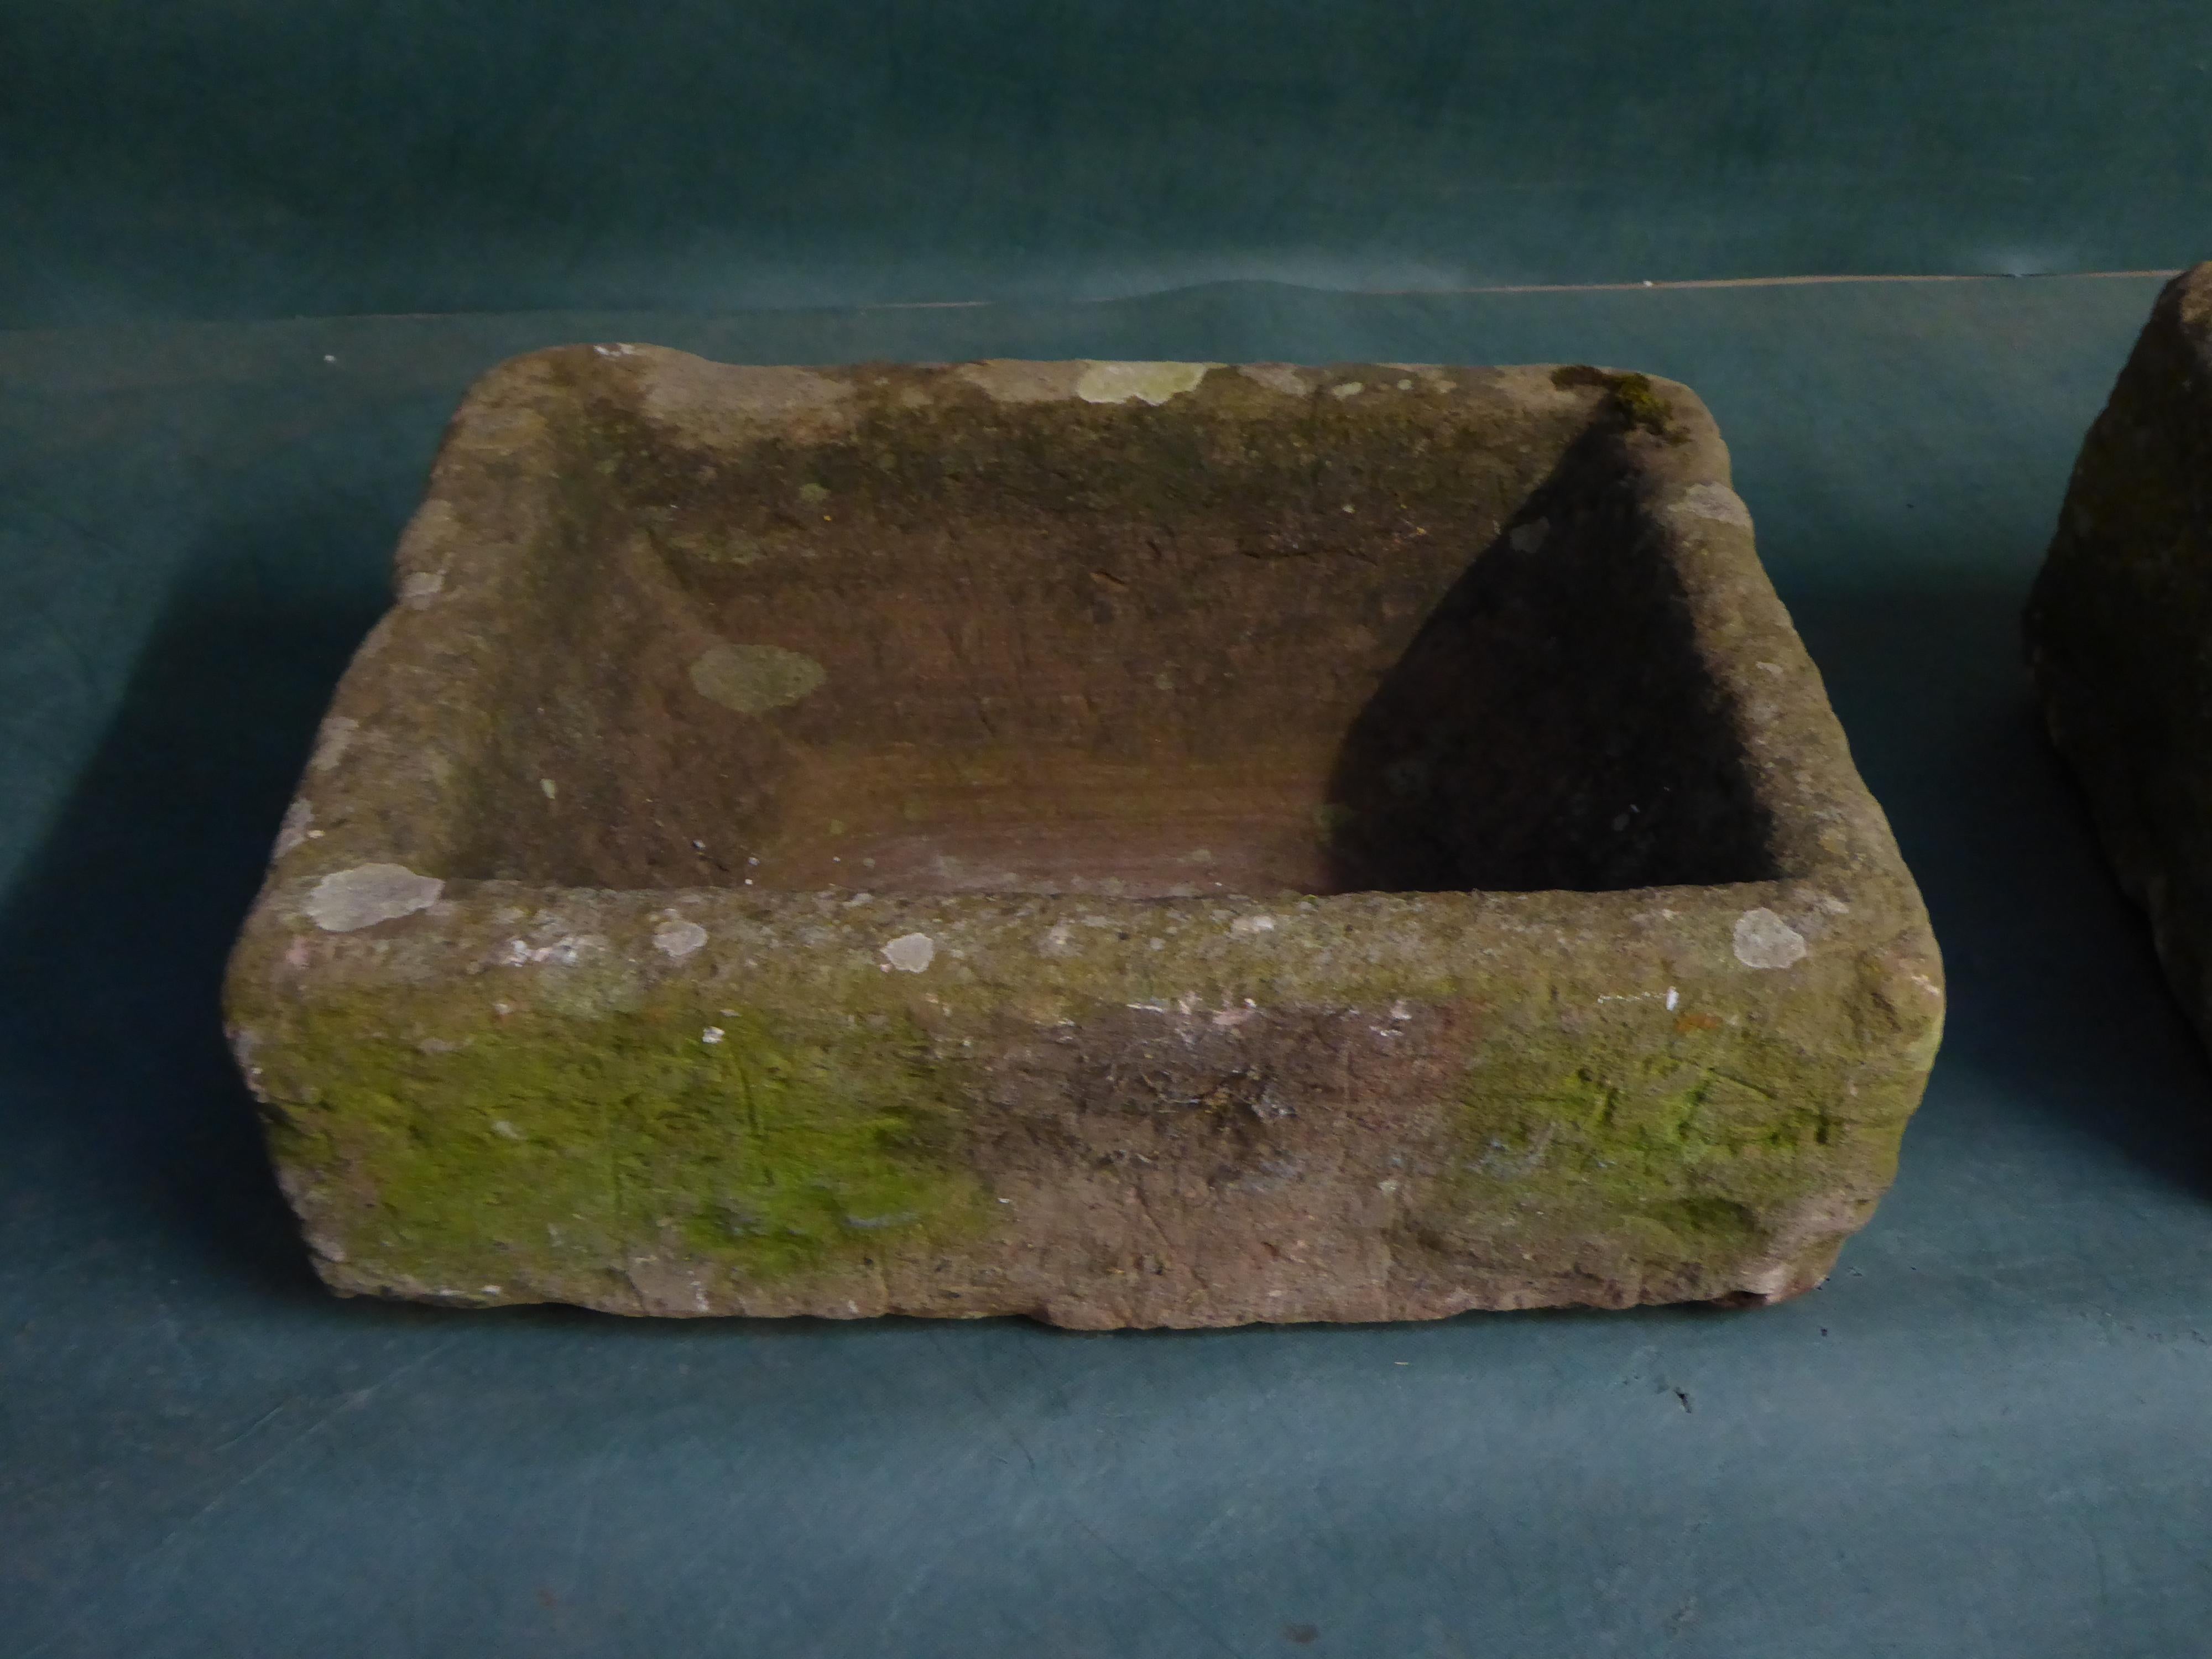 Pair of Georgian stone garden troughs, circa 1820

Measures: 22 inches x 16 inches x 9 inches.